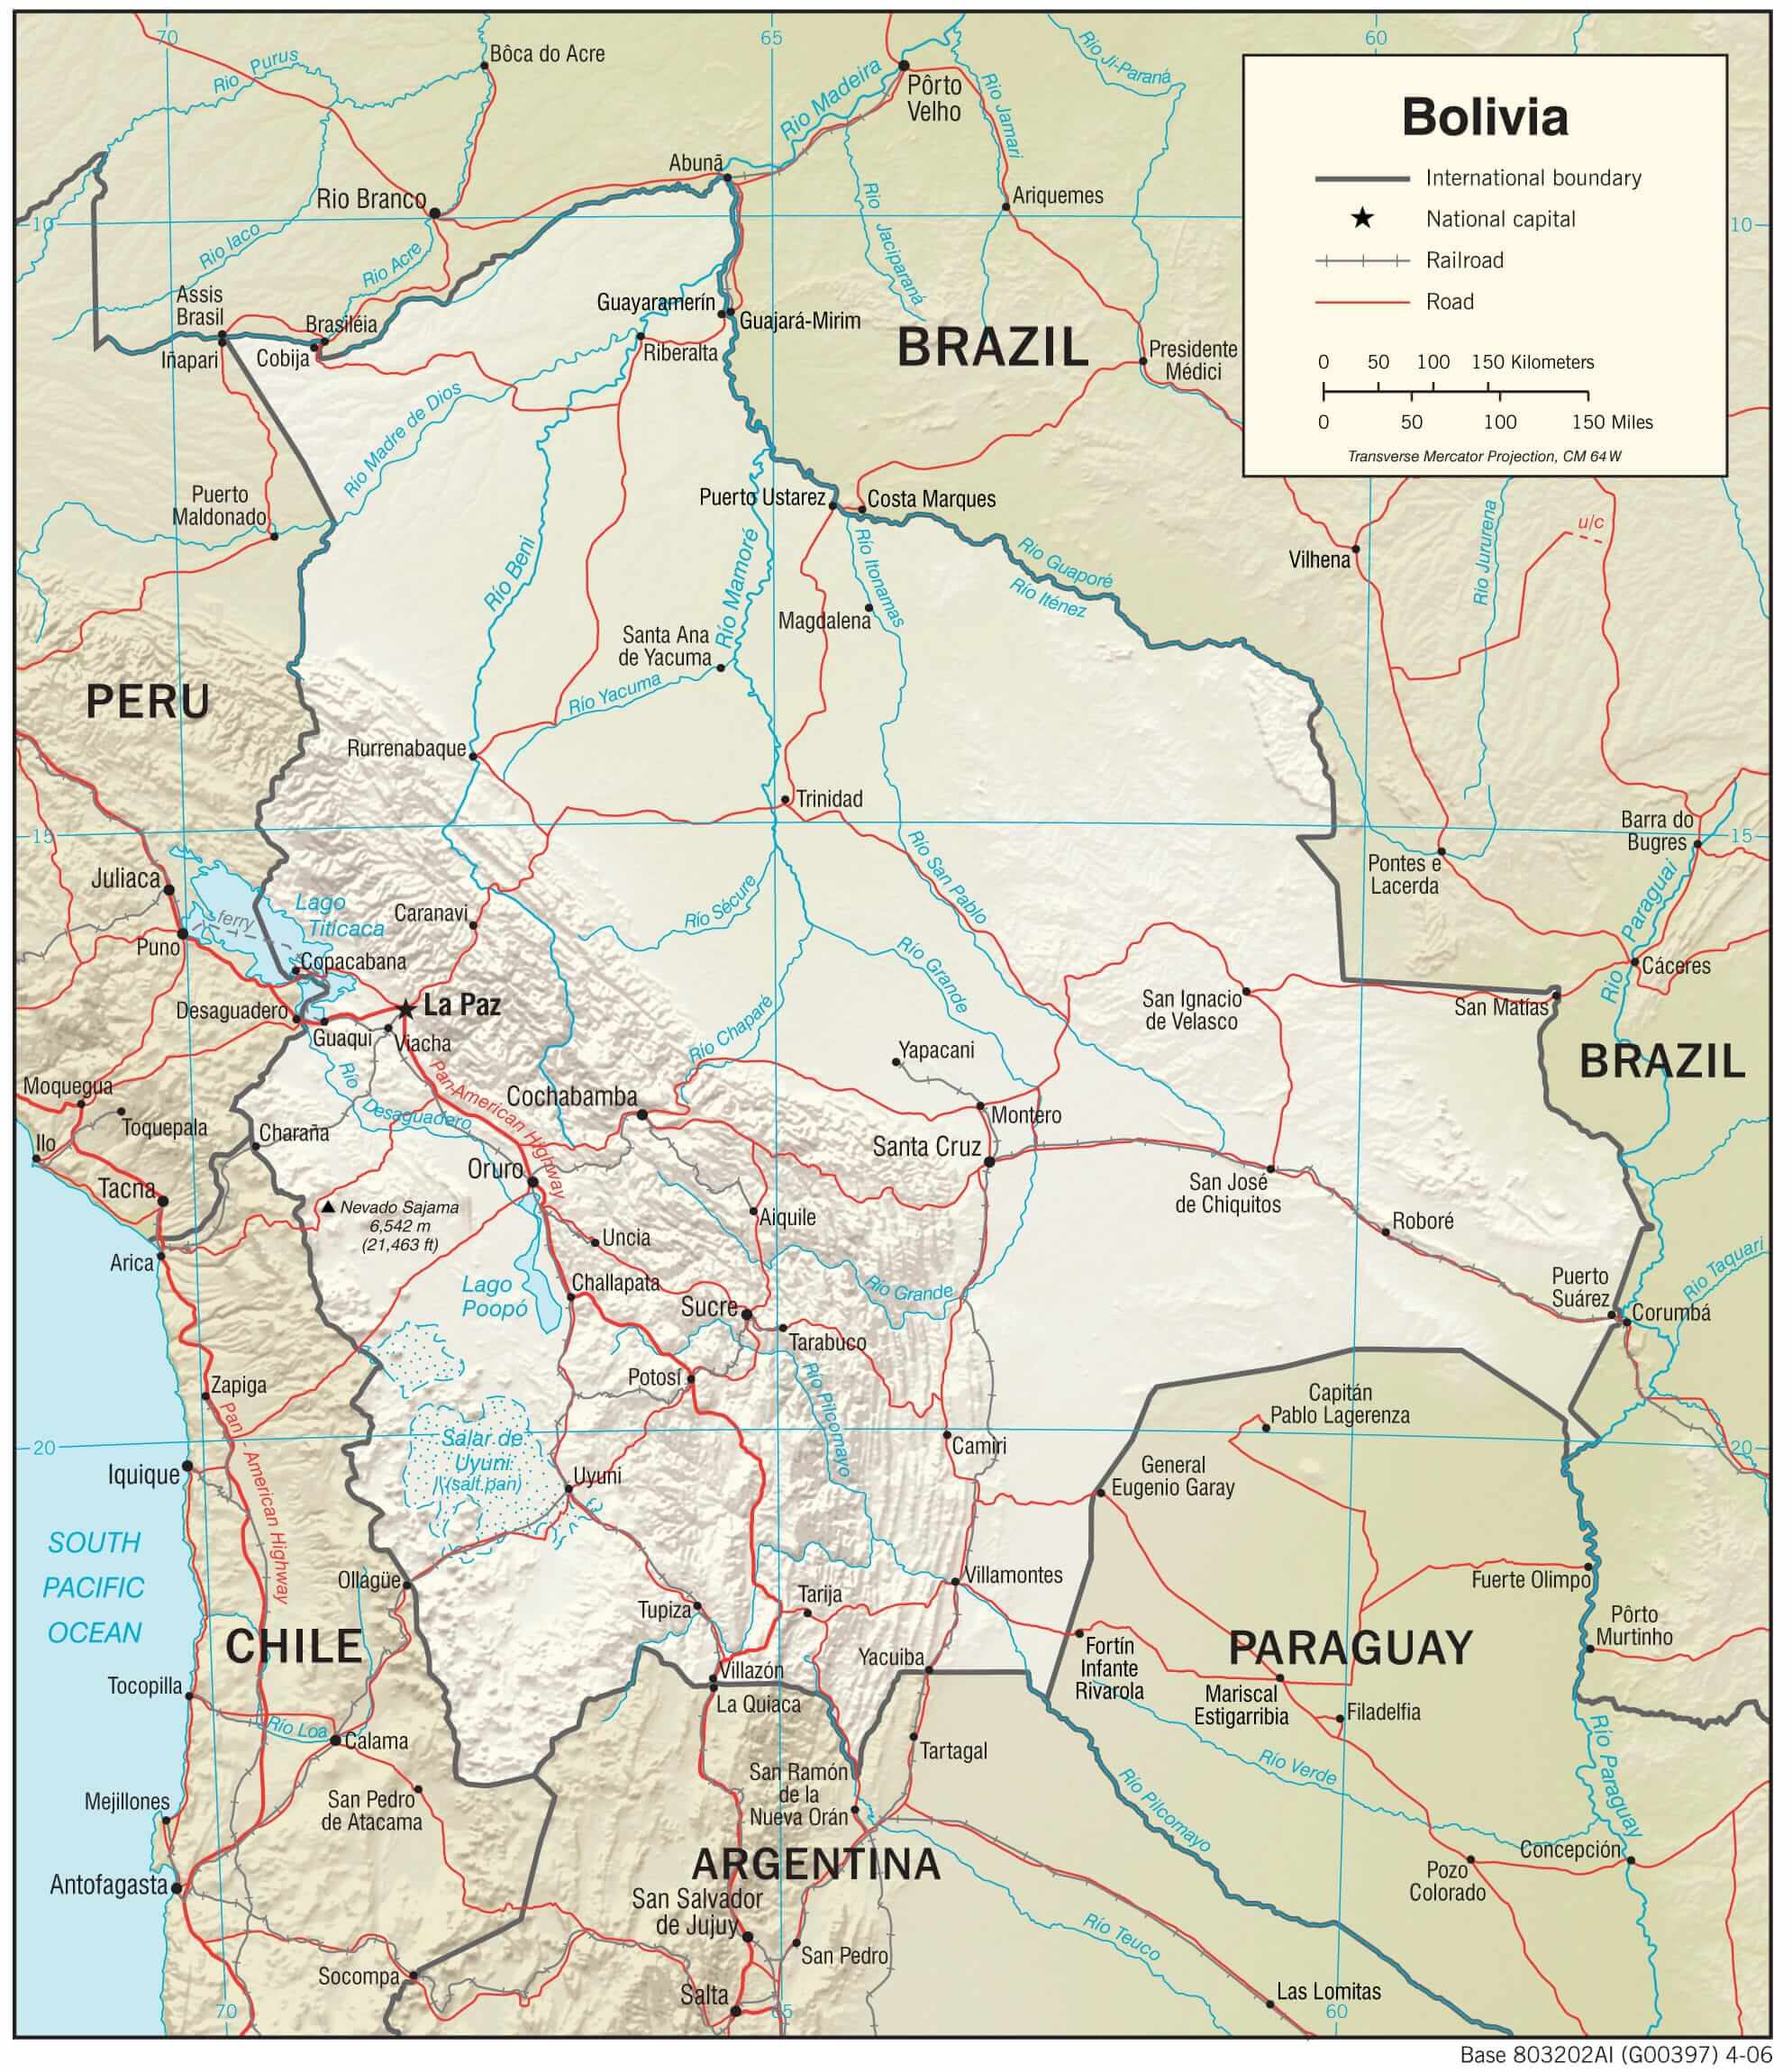 Bolivia physiographic map